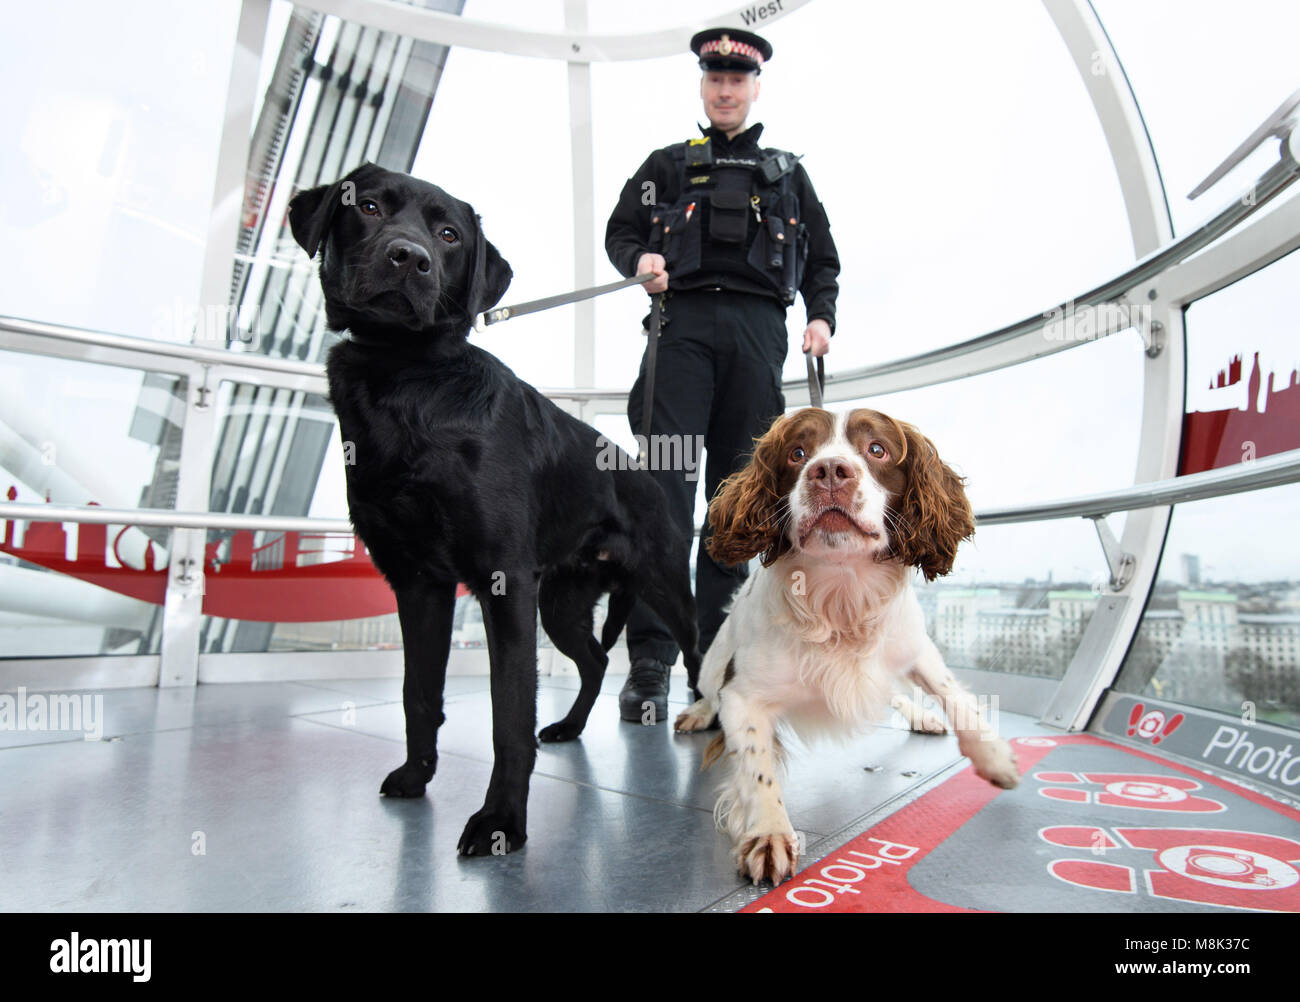 the-london-eye-celebrated-chinese-new-year-of-the-dog-by-inviting-M8K37C.jpg